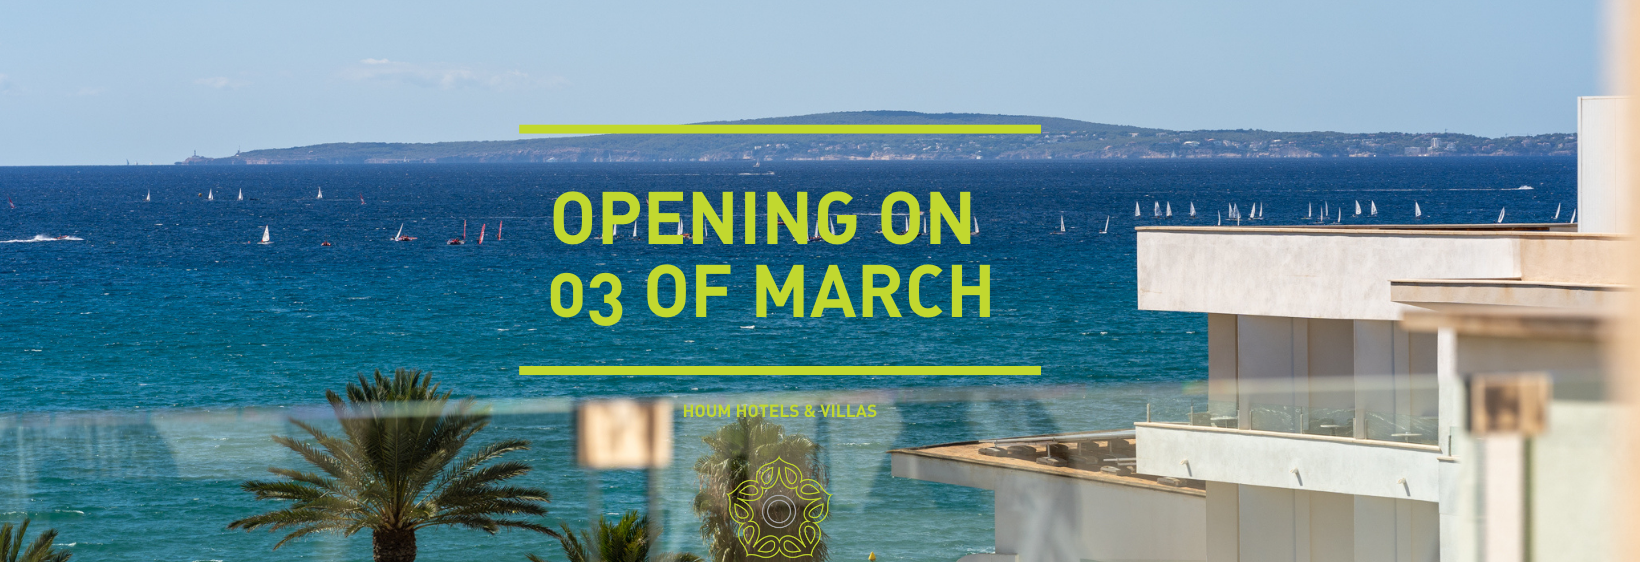 Opening 03 of March